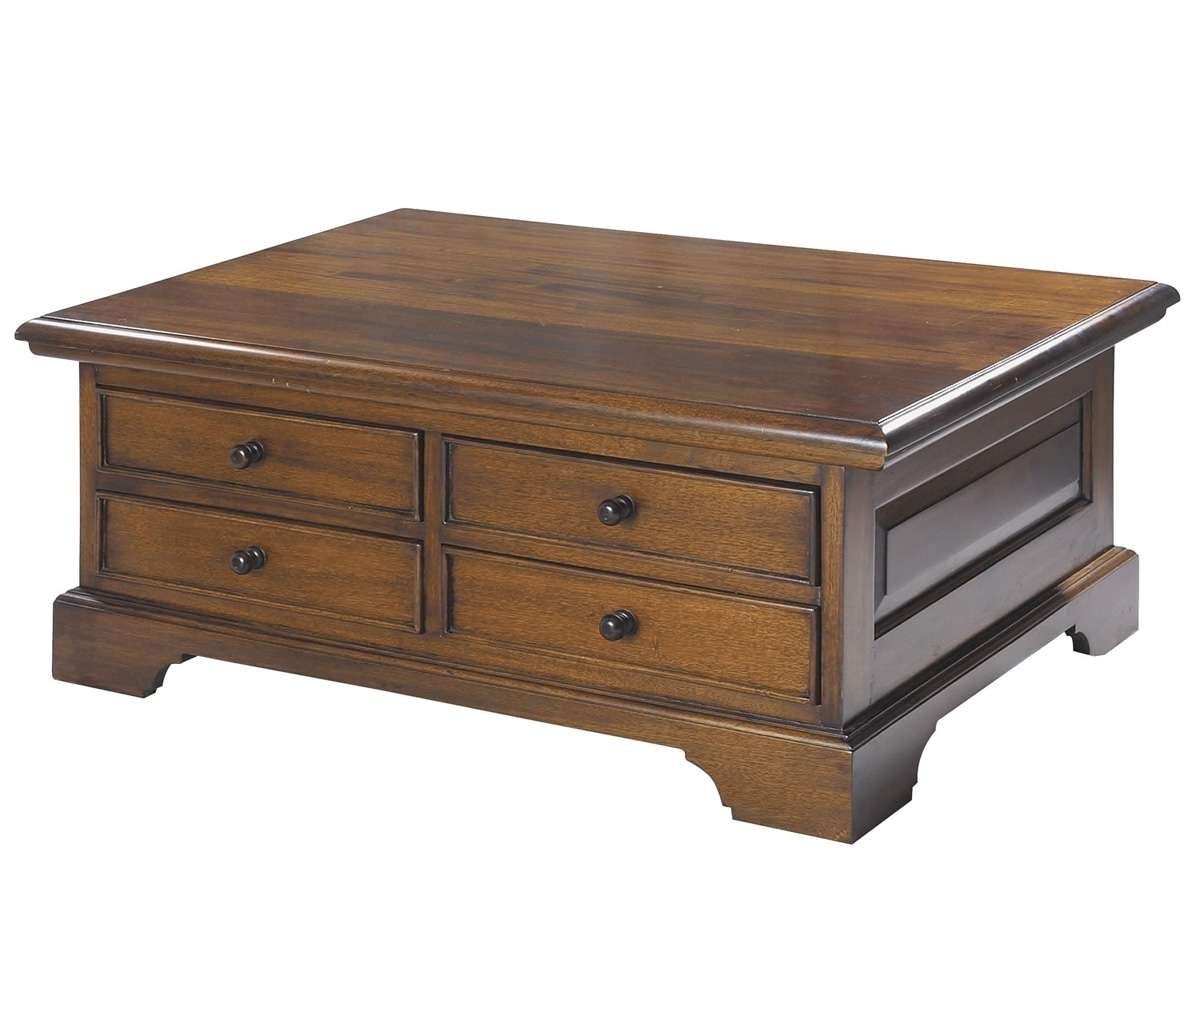 Coffee Tables : Square Coffee Table With Storage Ottoman Drawers With Regard To Well Known Oak Coffee Tables With Storage (Gallery 19 of 20)